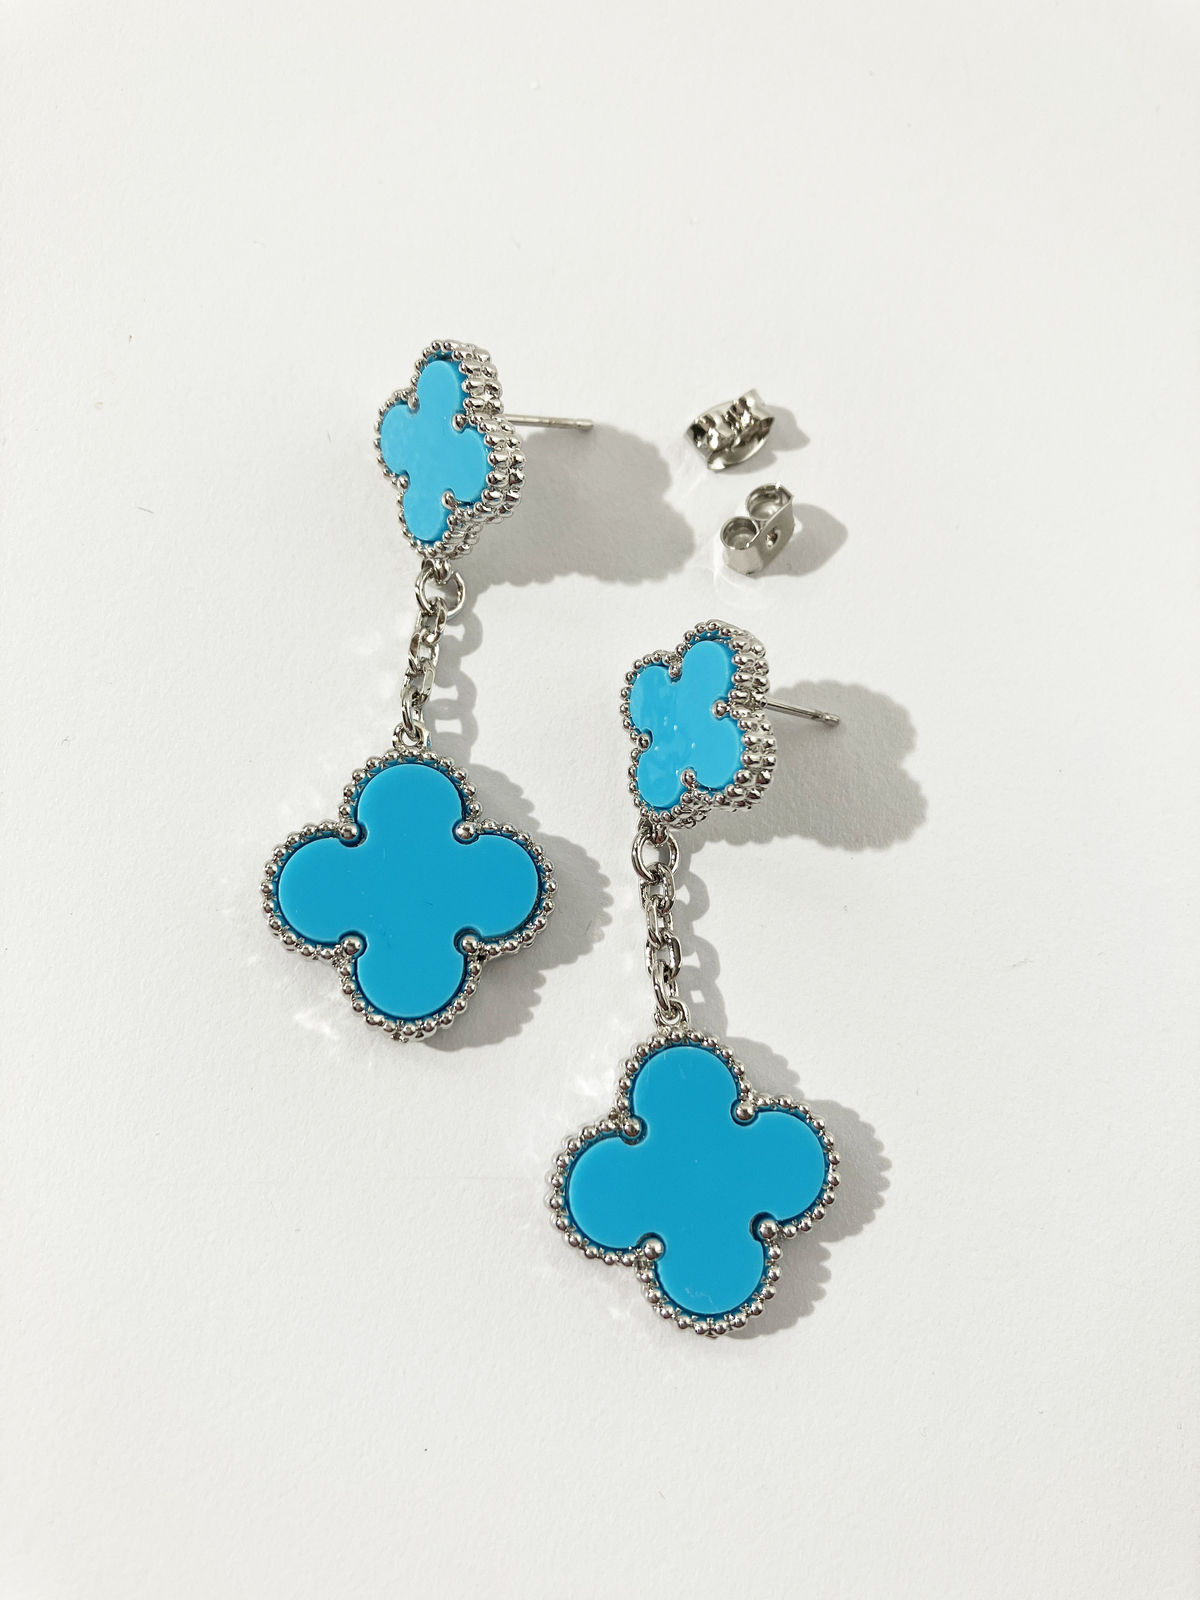 Primary image for Drop Turquoise and Silver Quatrefoil Motif Earrings